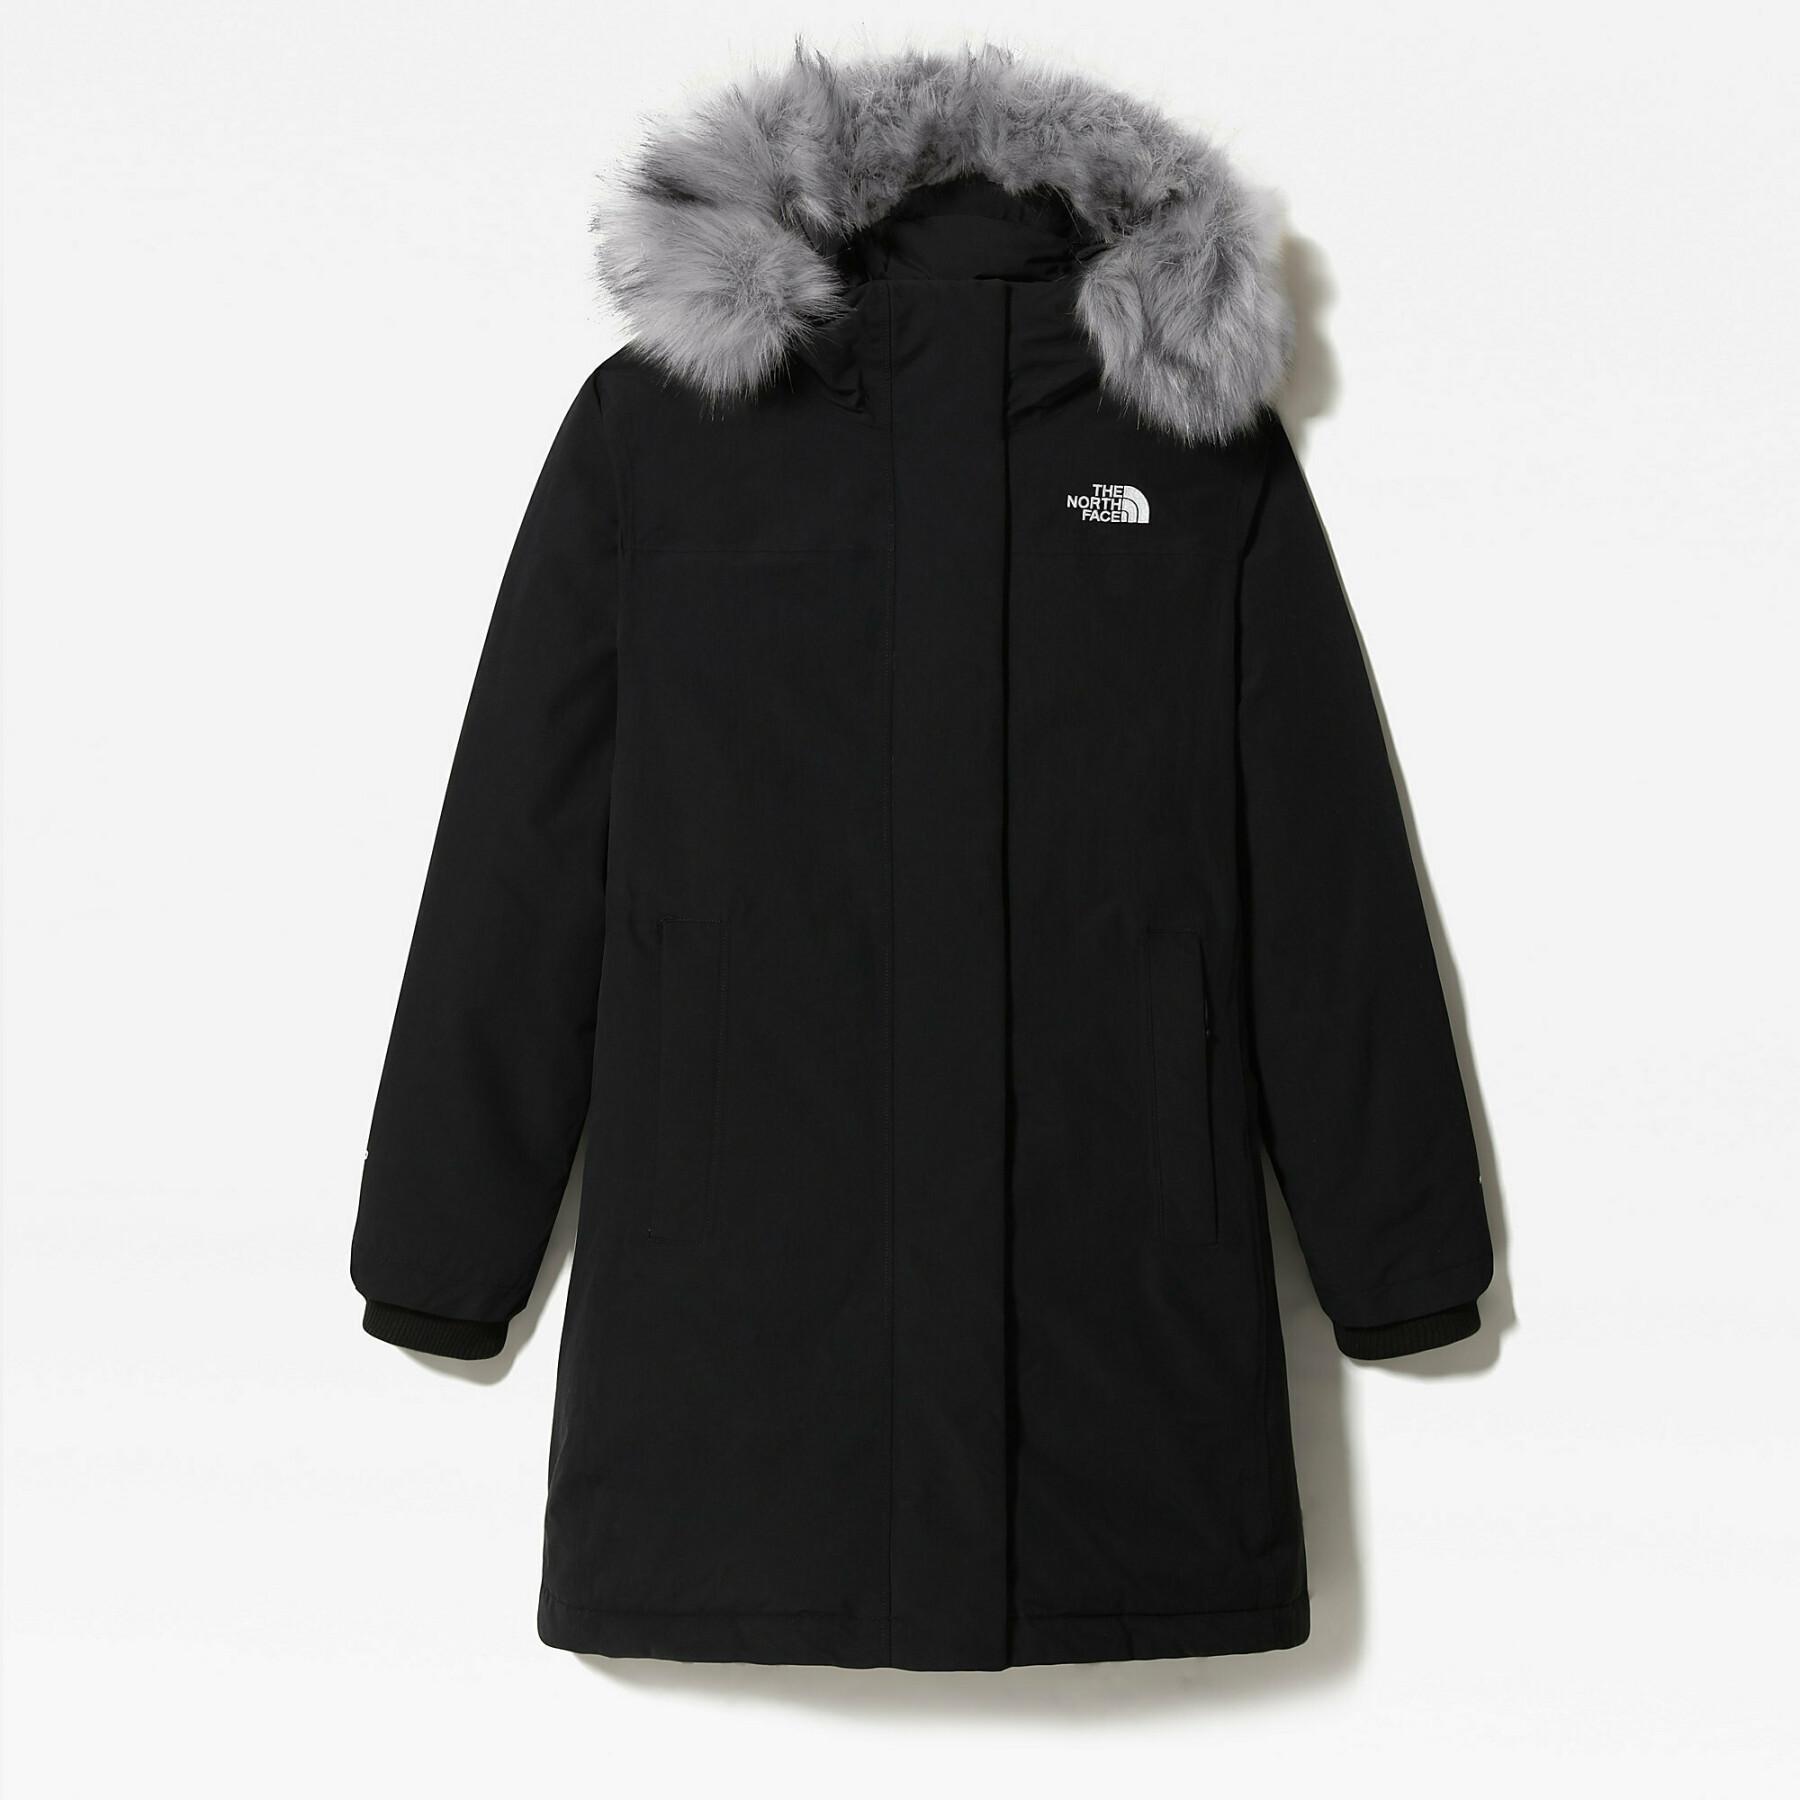 Women's parka The North Face Arctic